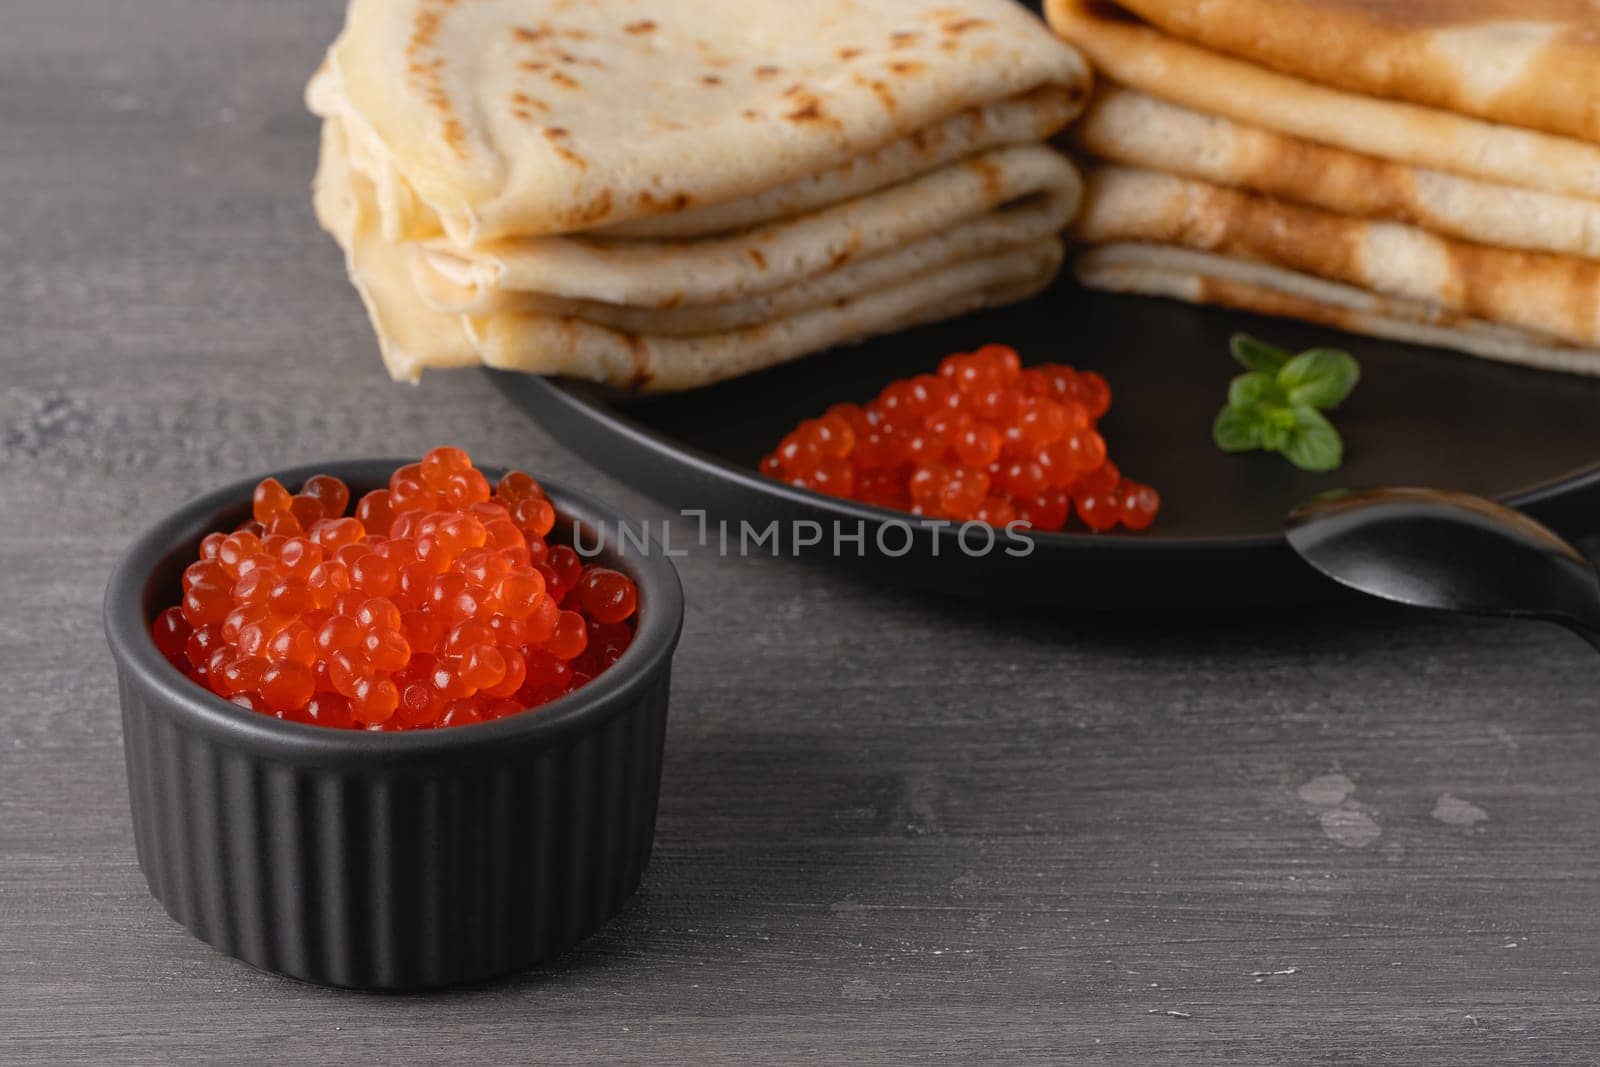 Pancakes with red caviar. Close-up of pancakes stacked on grey background.